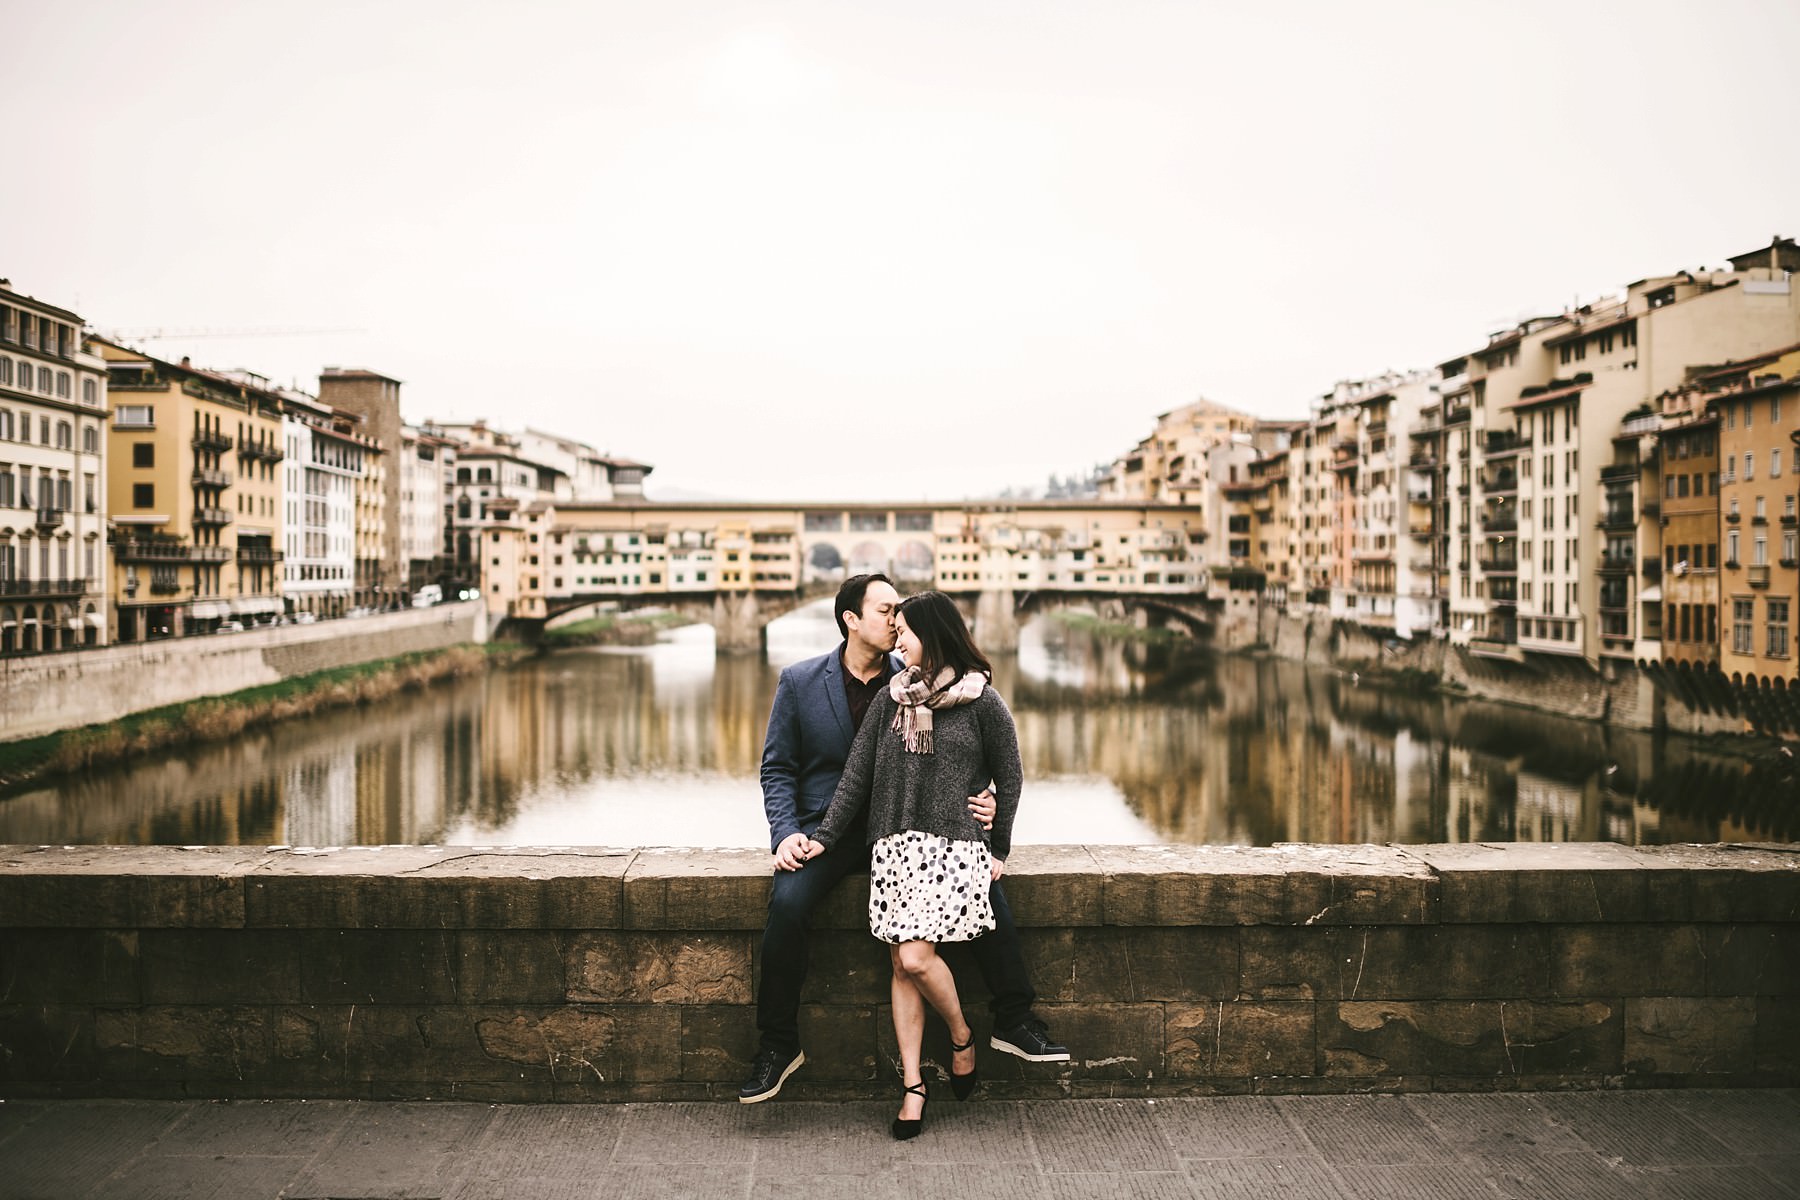 Enjoy your special vacation in Florence with an exciting sunrise early morning photo session